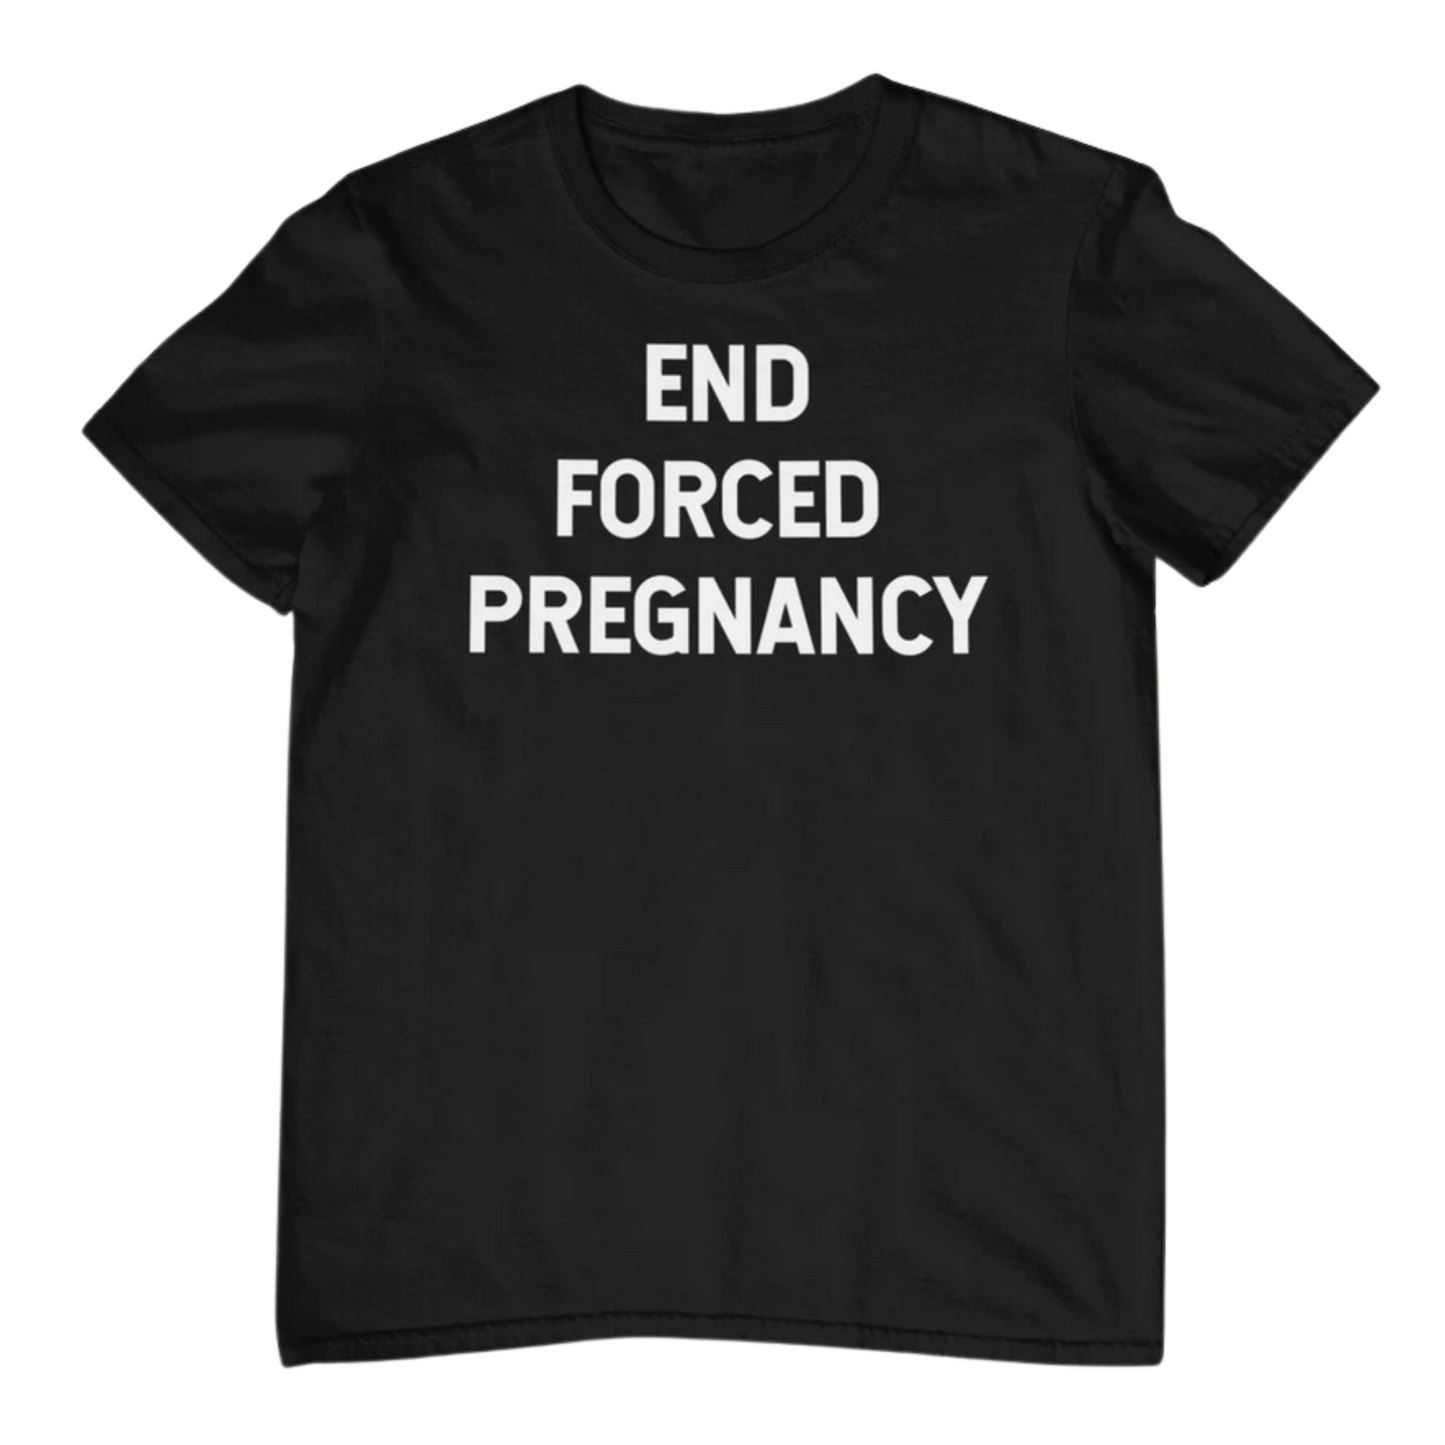 END FORCED PREGNANCY